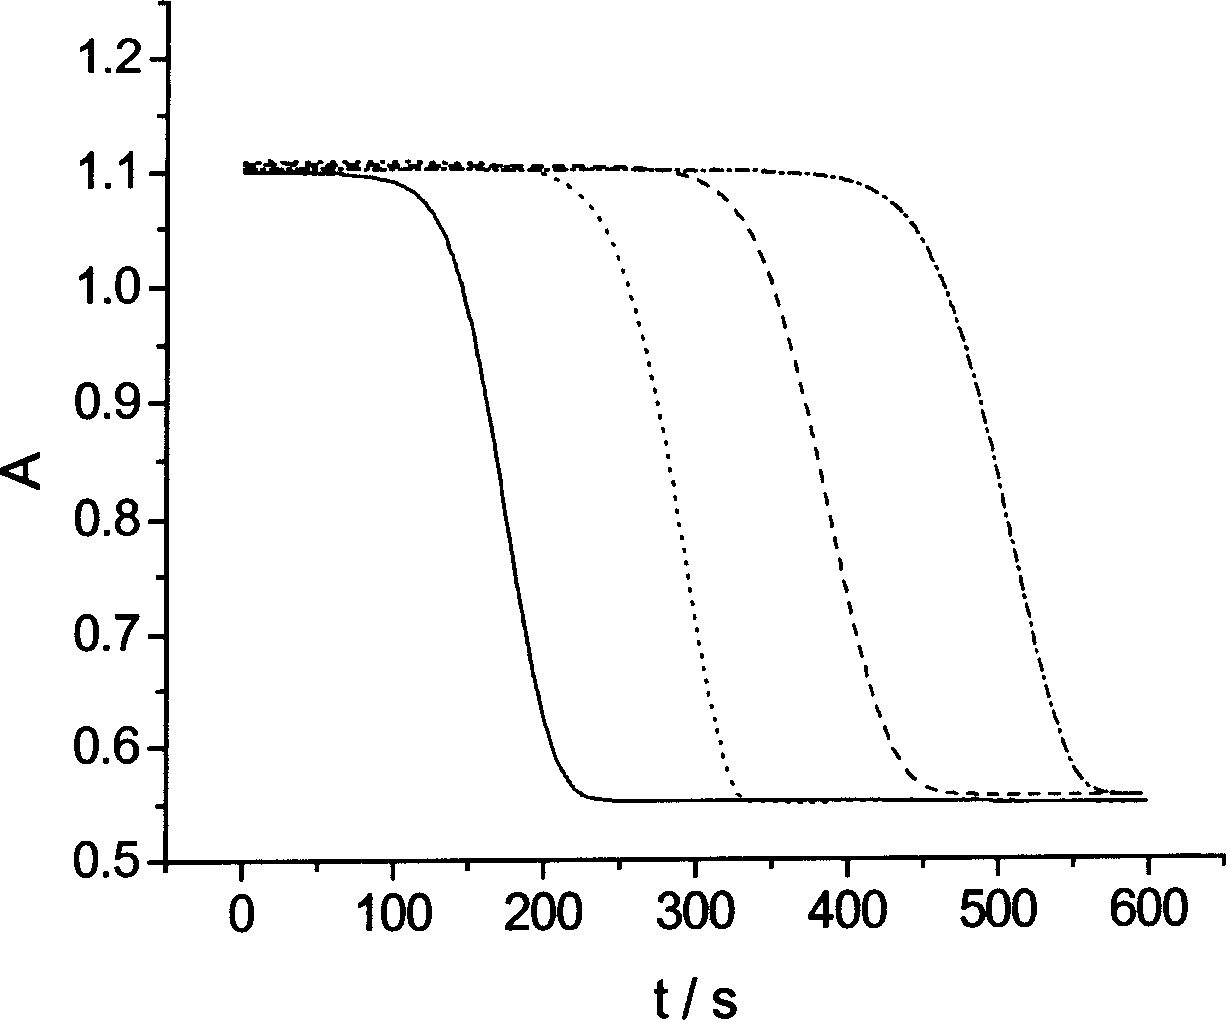 Timing method for measuring micro-protein